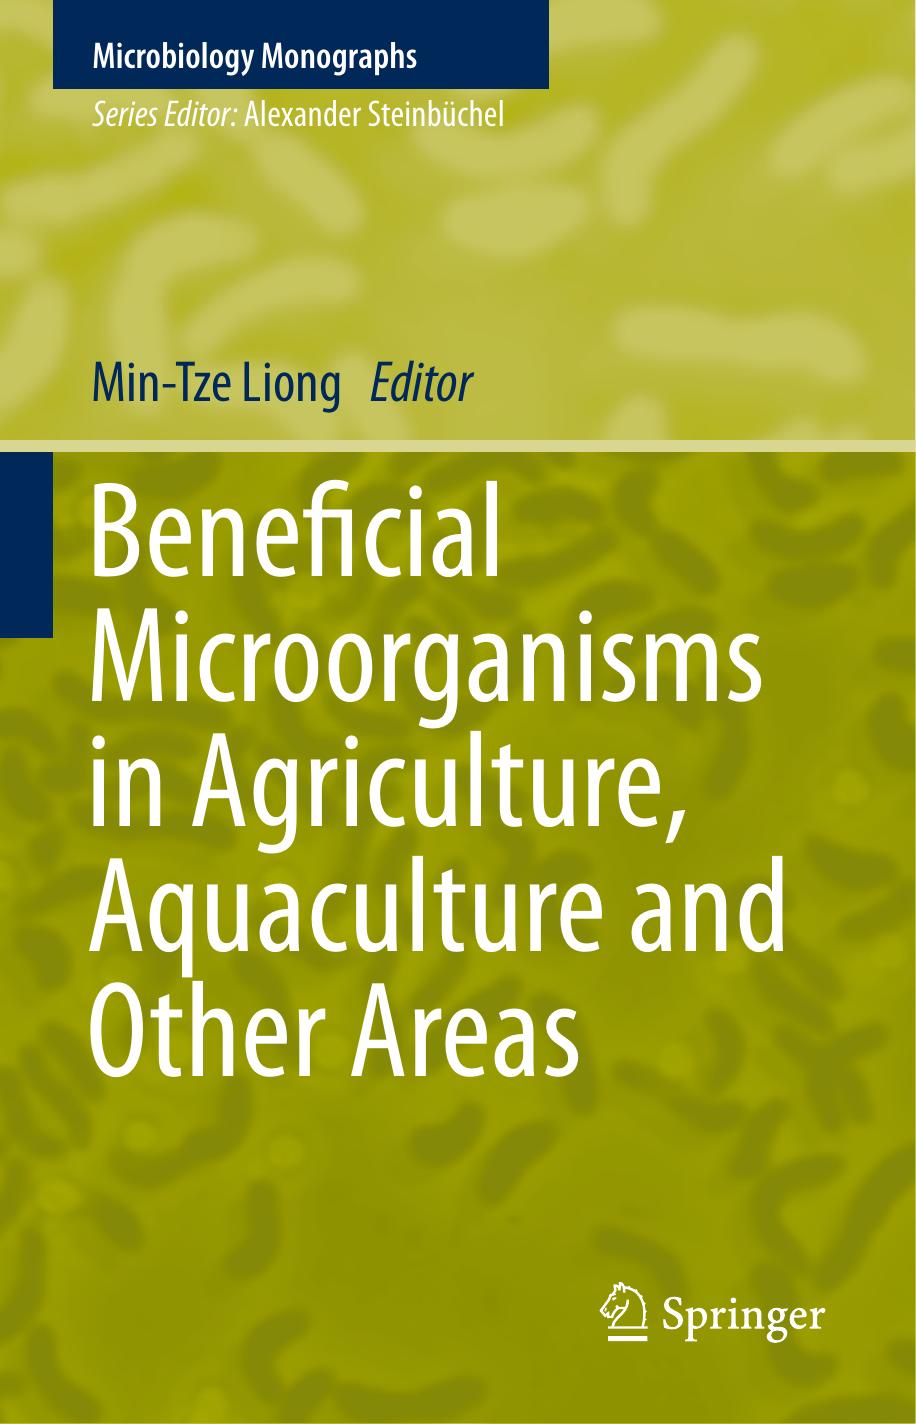 Beneficial Microorganisms in Agriculture, Aquaculture and Other Areas-Springer International Publishing (2015)